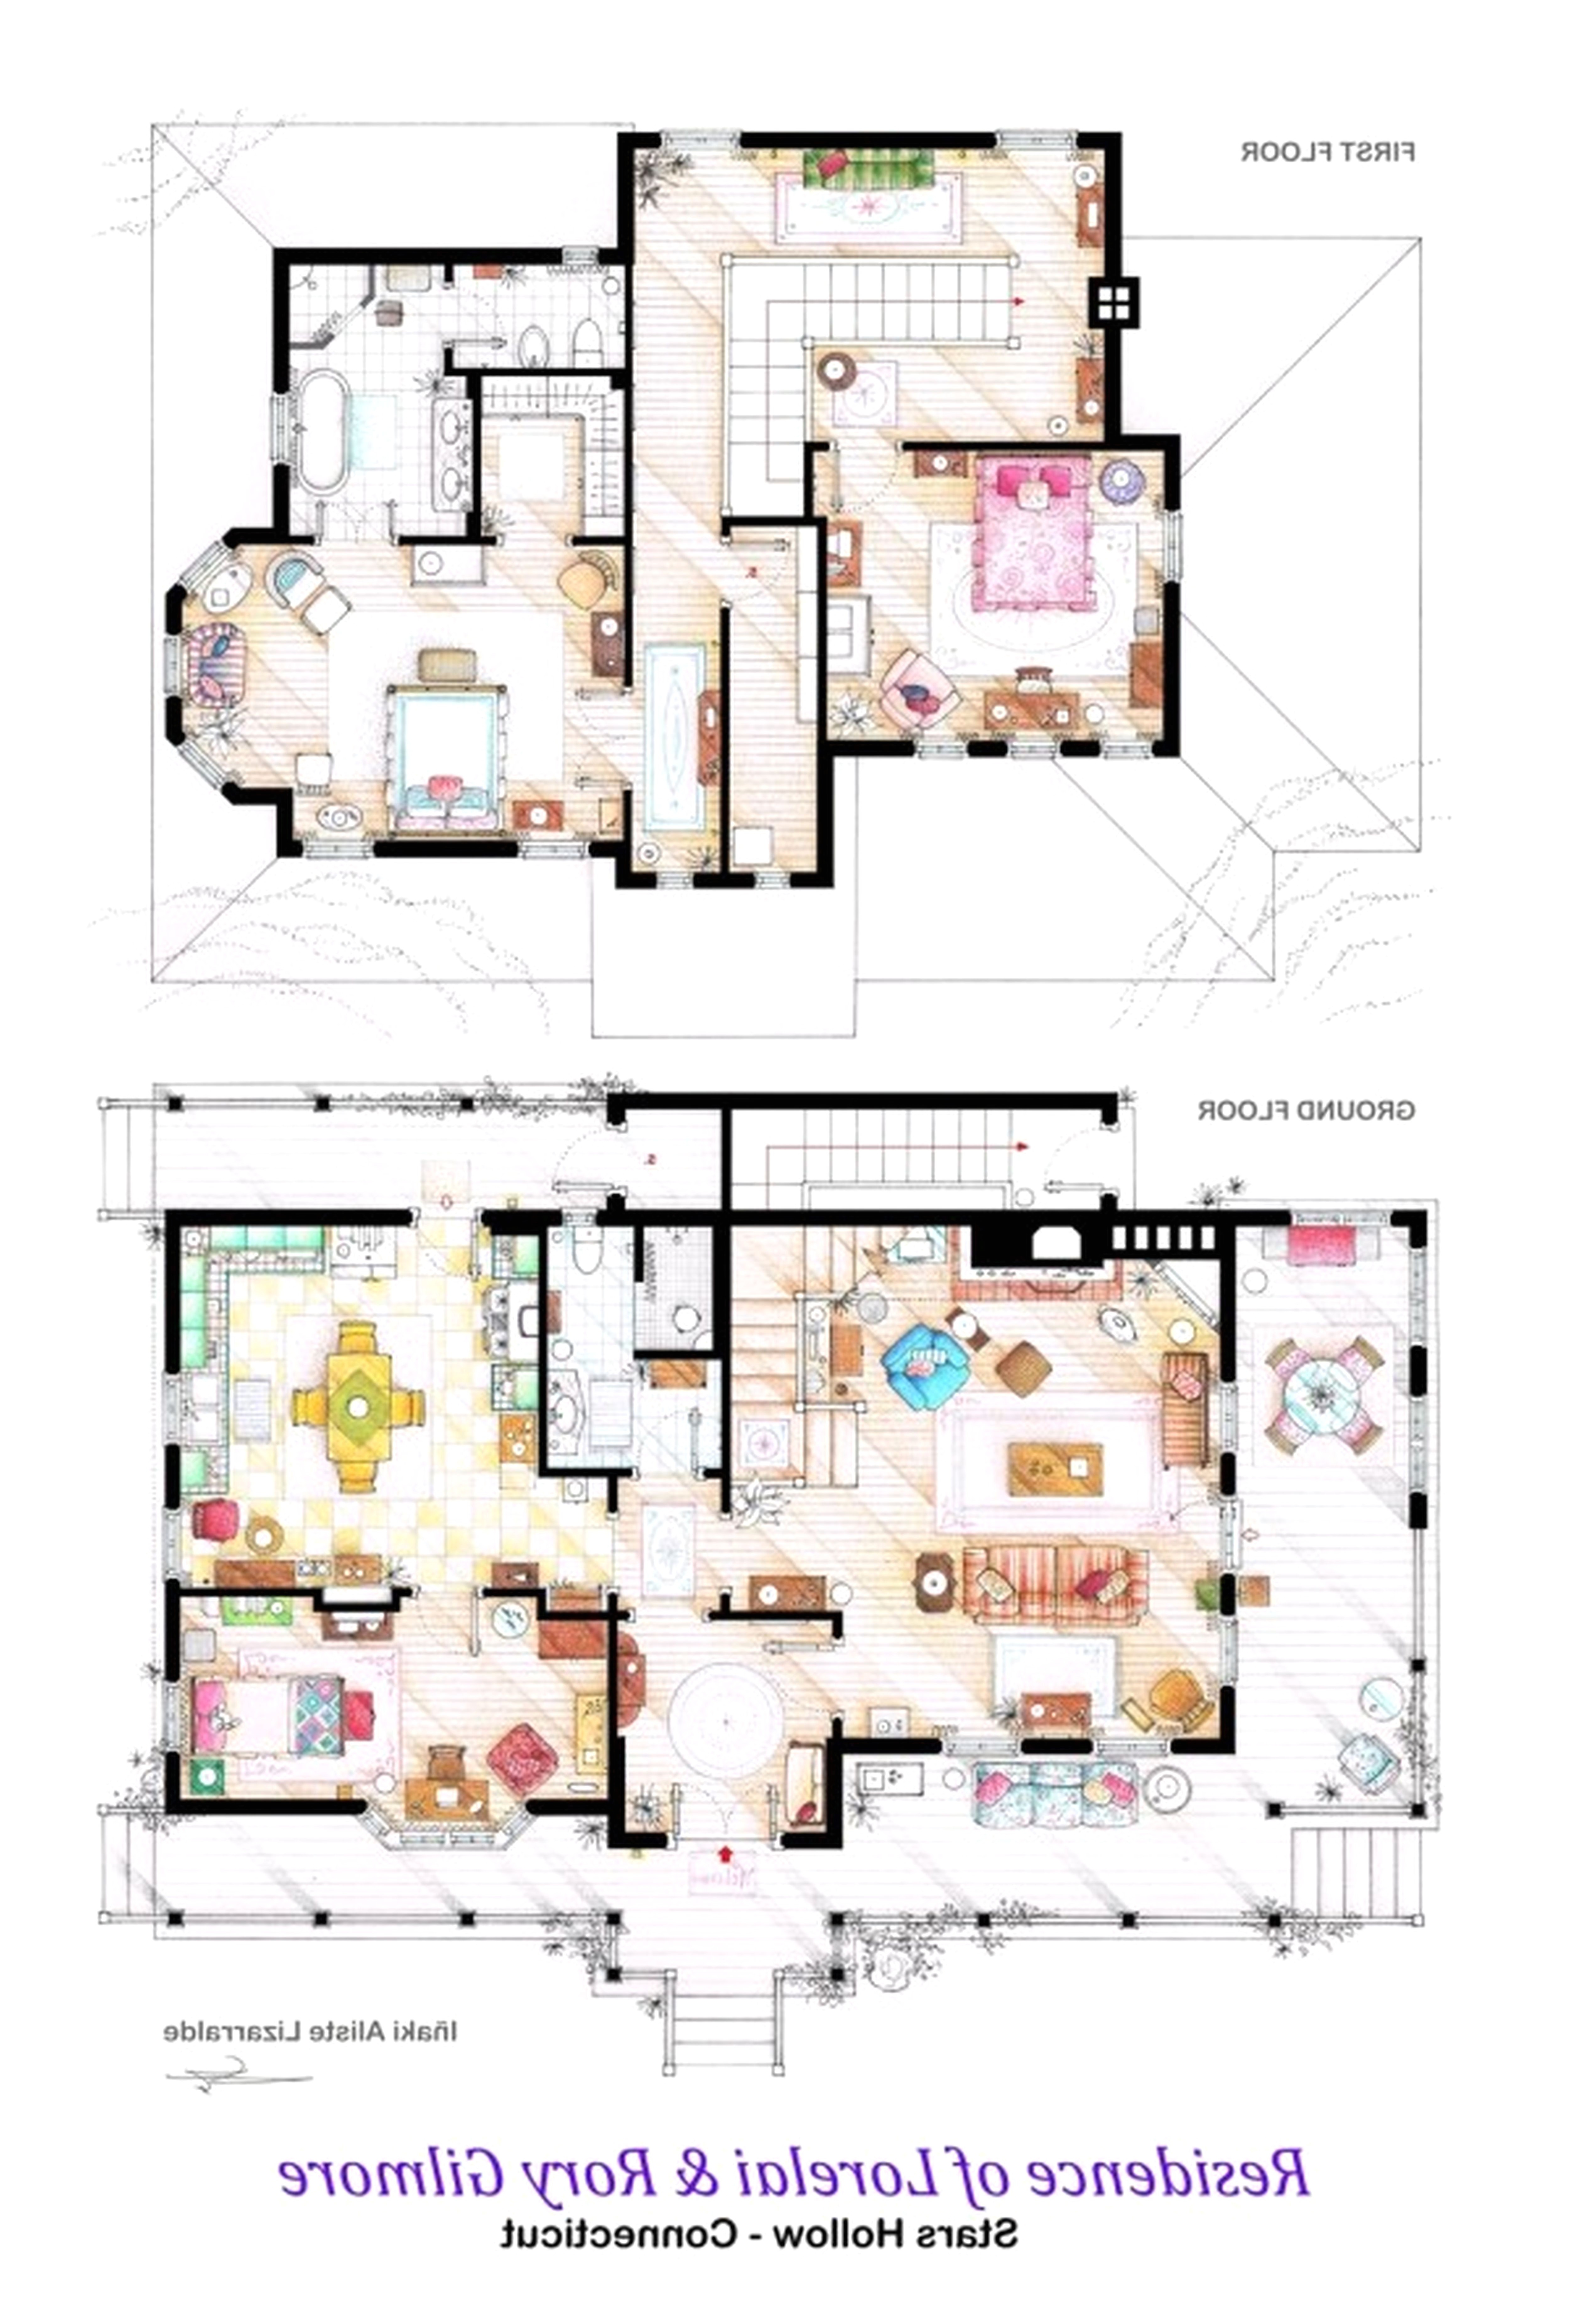 how to draw floor plans in google sketchup